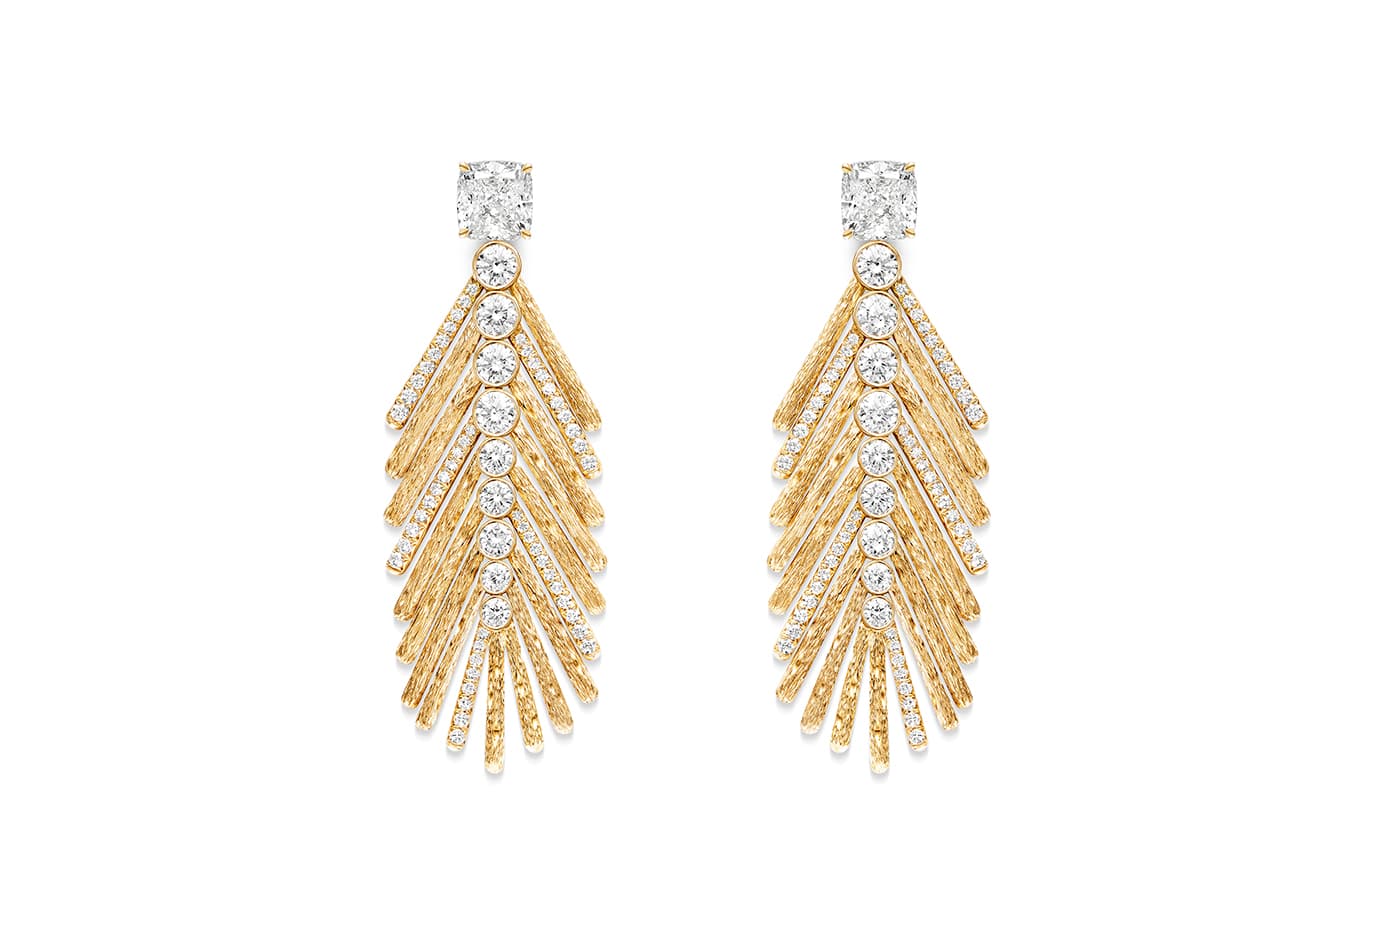 Piaget new Golden Oasis fine jewellery collection